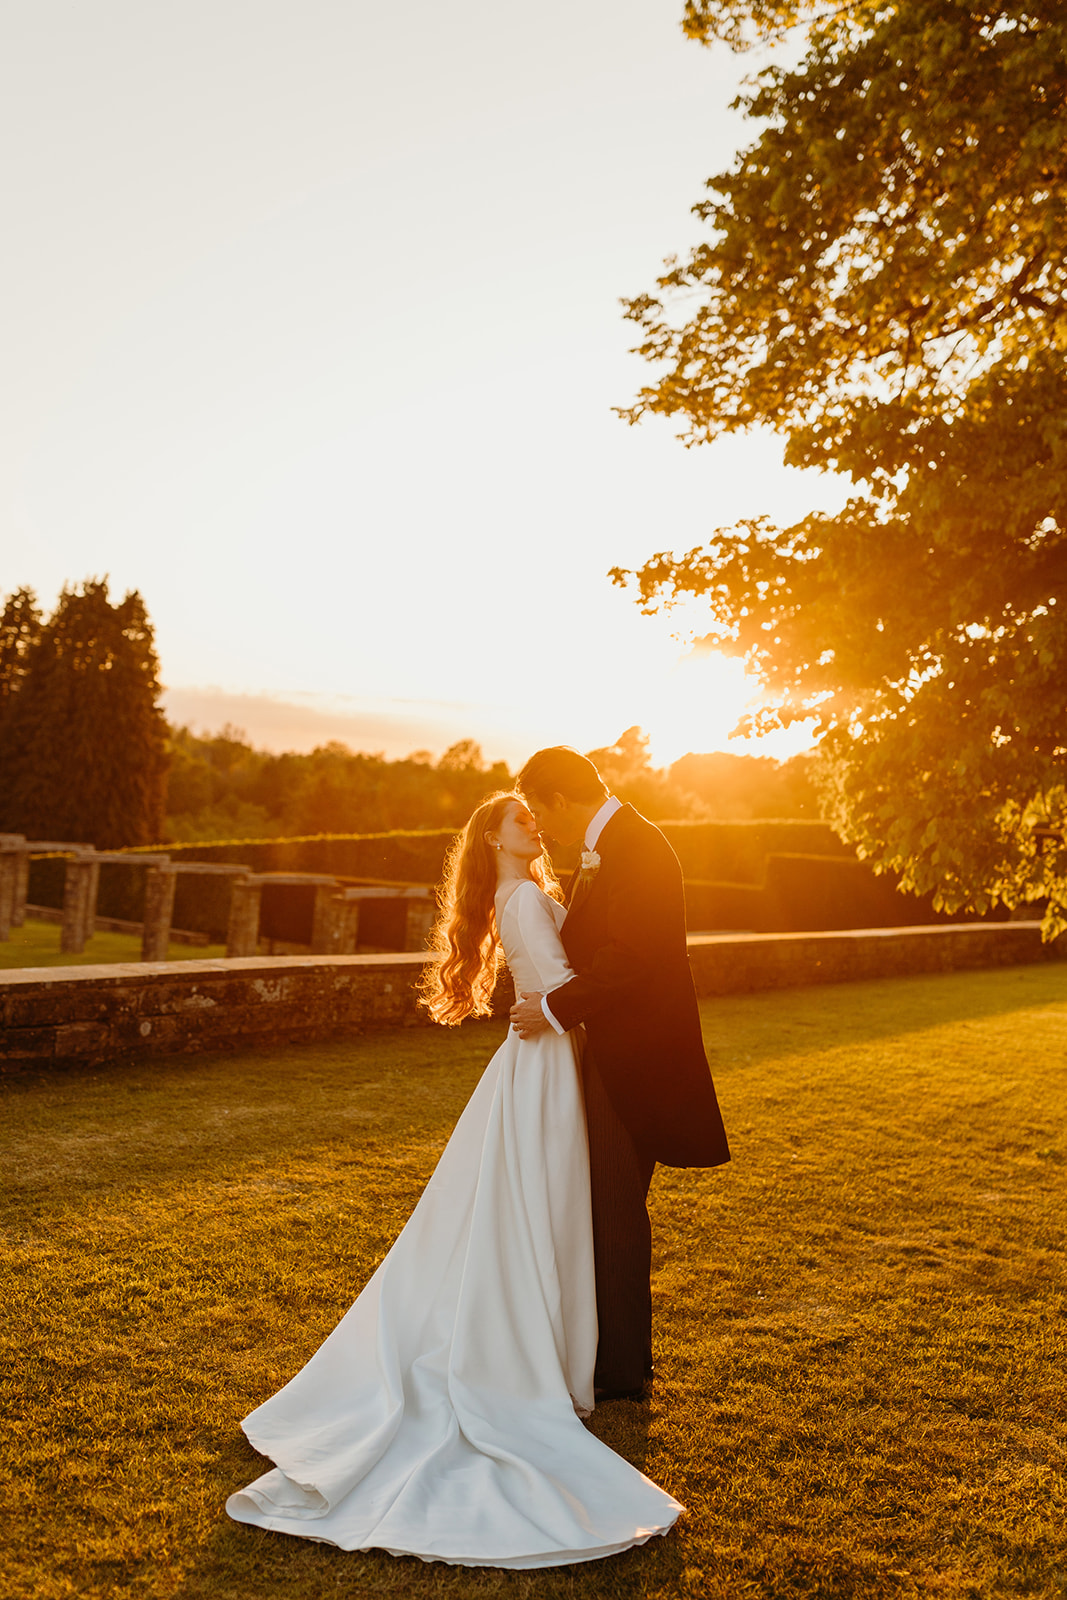 Stunning portraits of Kate and Ed at sunset on the Buckhurst Park estate grounds.